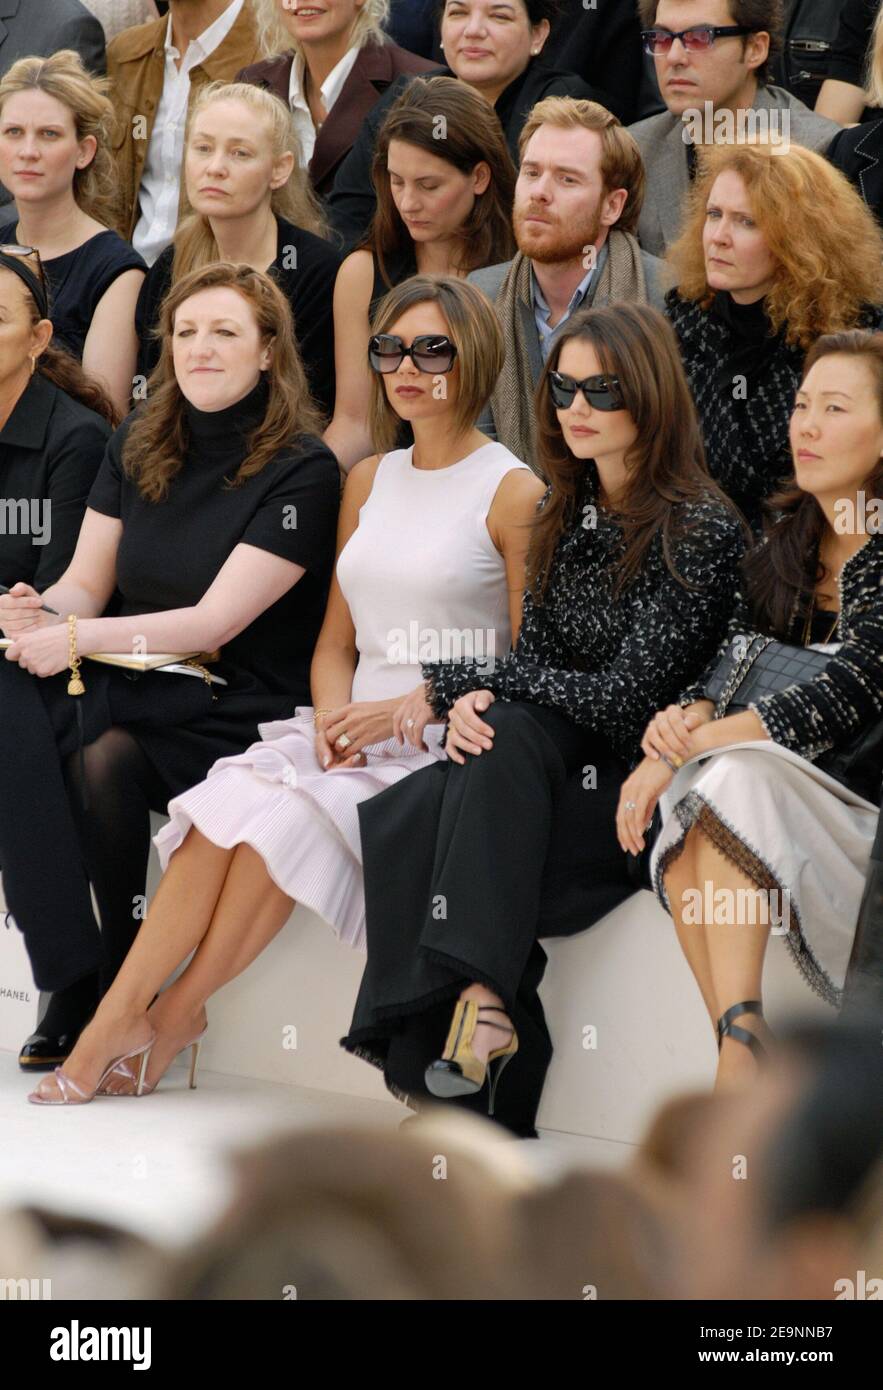 Victoria Beckham and Katie Holmes attend the presentation of Chanel  Spring-Summer 2007 Ready-to-Wear collection designed by Karl Lagerfeld held  in the 'Grand Palais' Paris, France on October 6, 2006. Photo by  Khayat-Nebinger-Orban-Taamallah/ABACAPRESS.COM